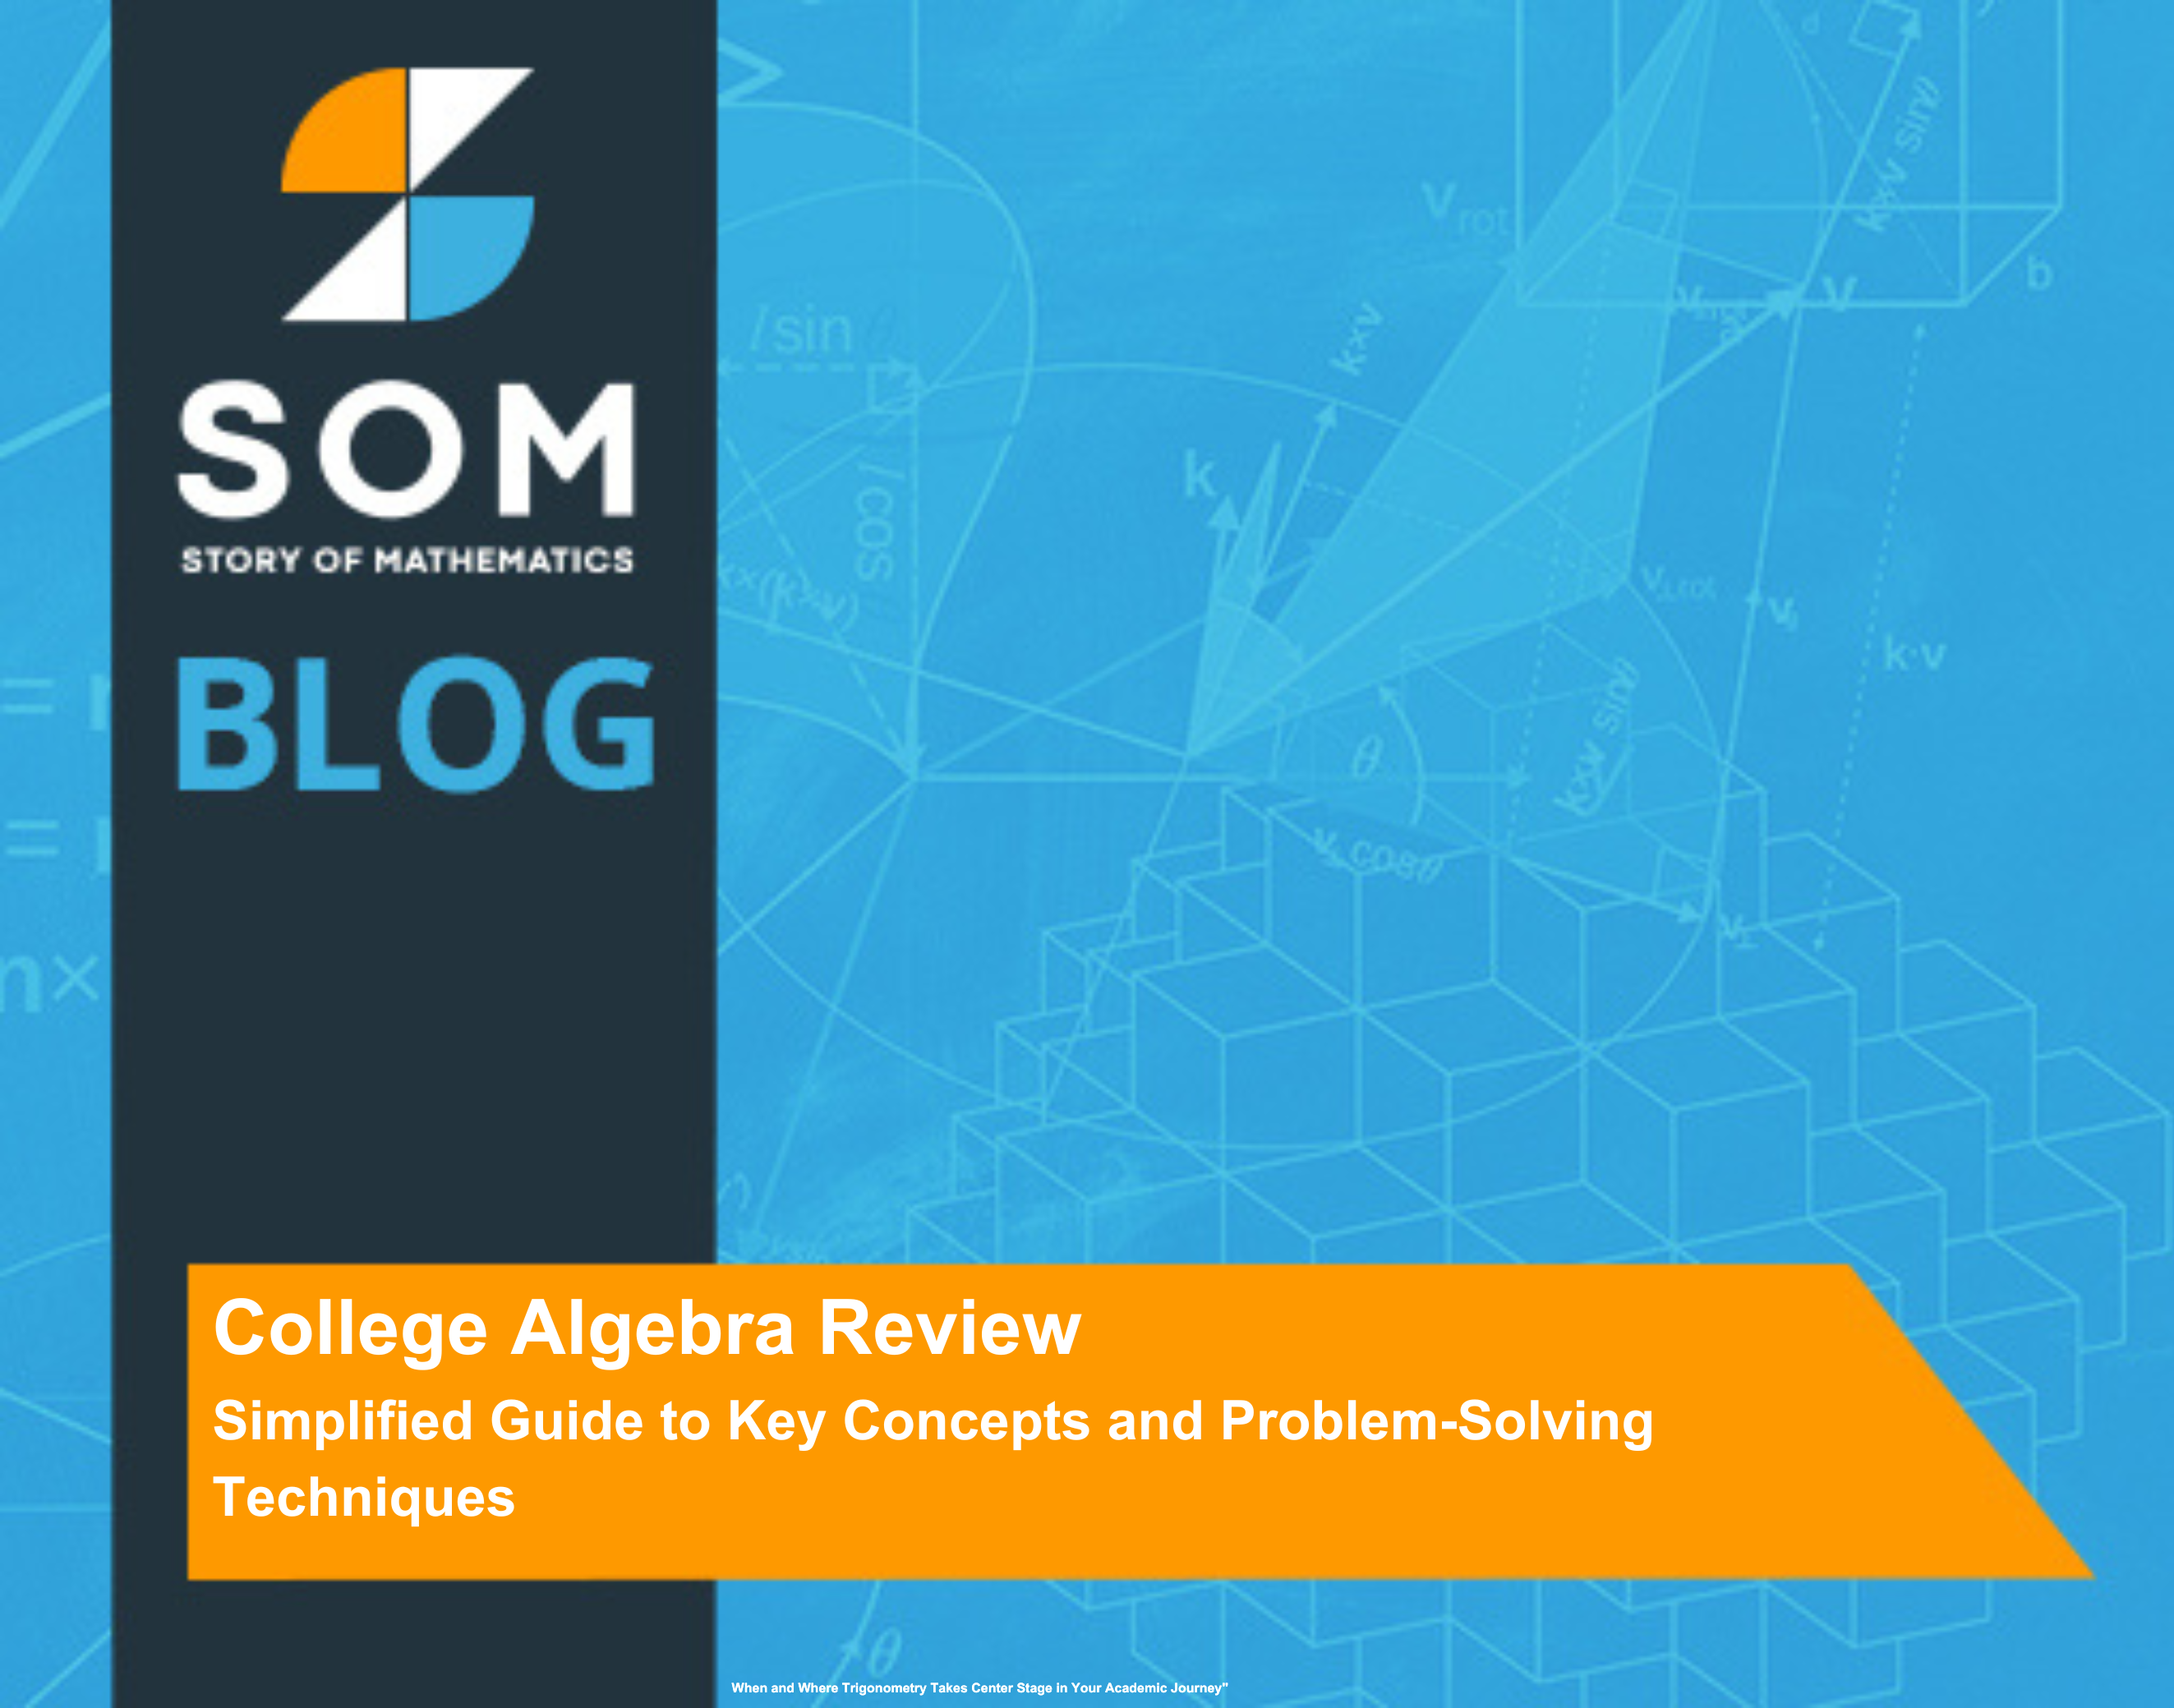 Feature Image College Algebra Review Simplified Guide to Key Concepts and Problem-Solving Techniques